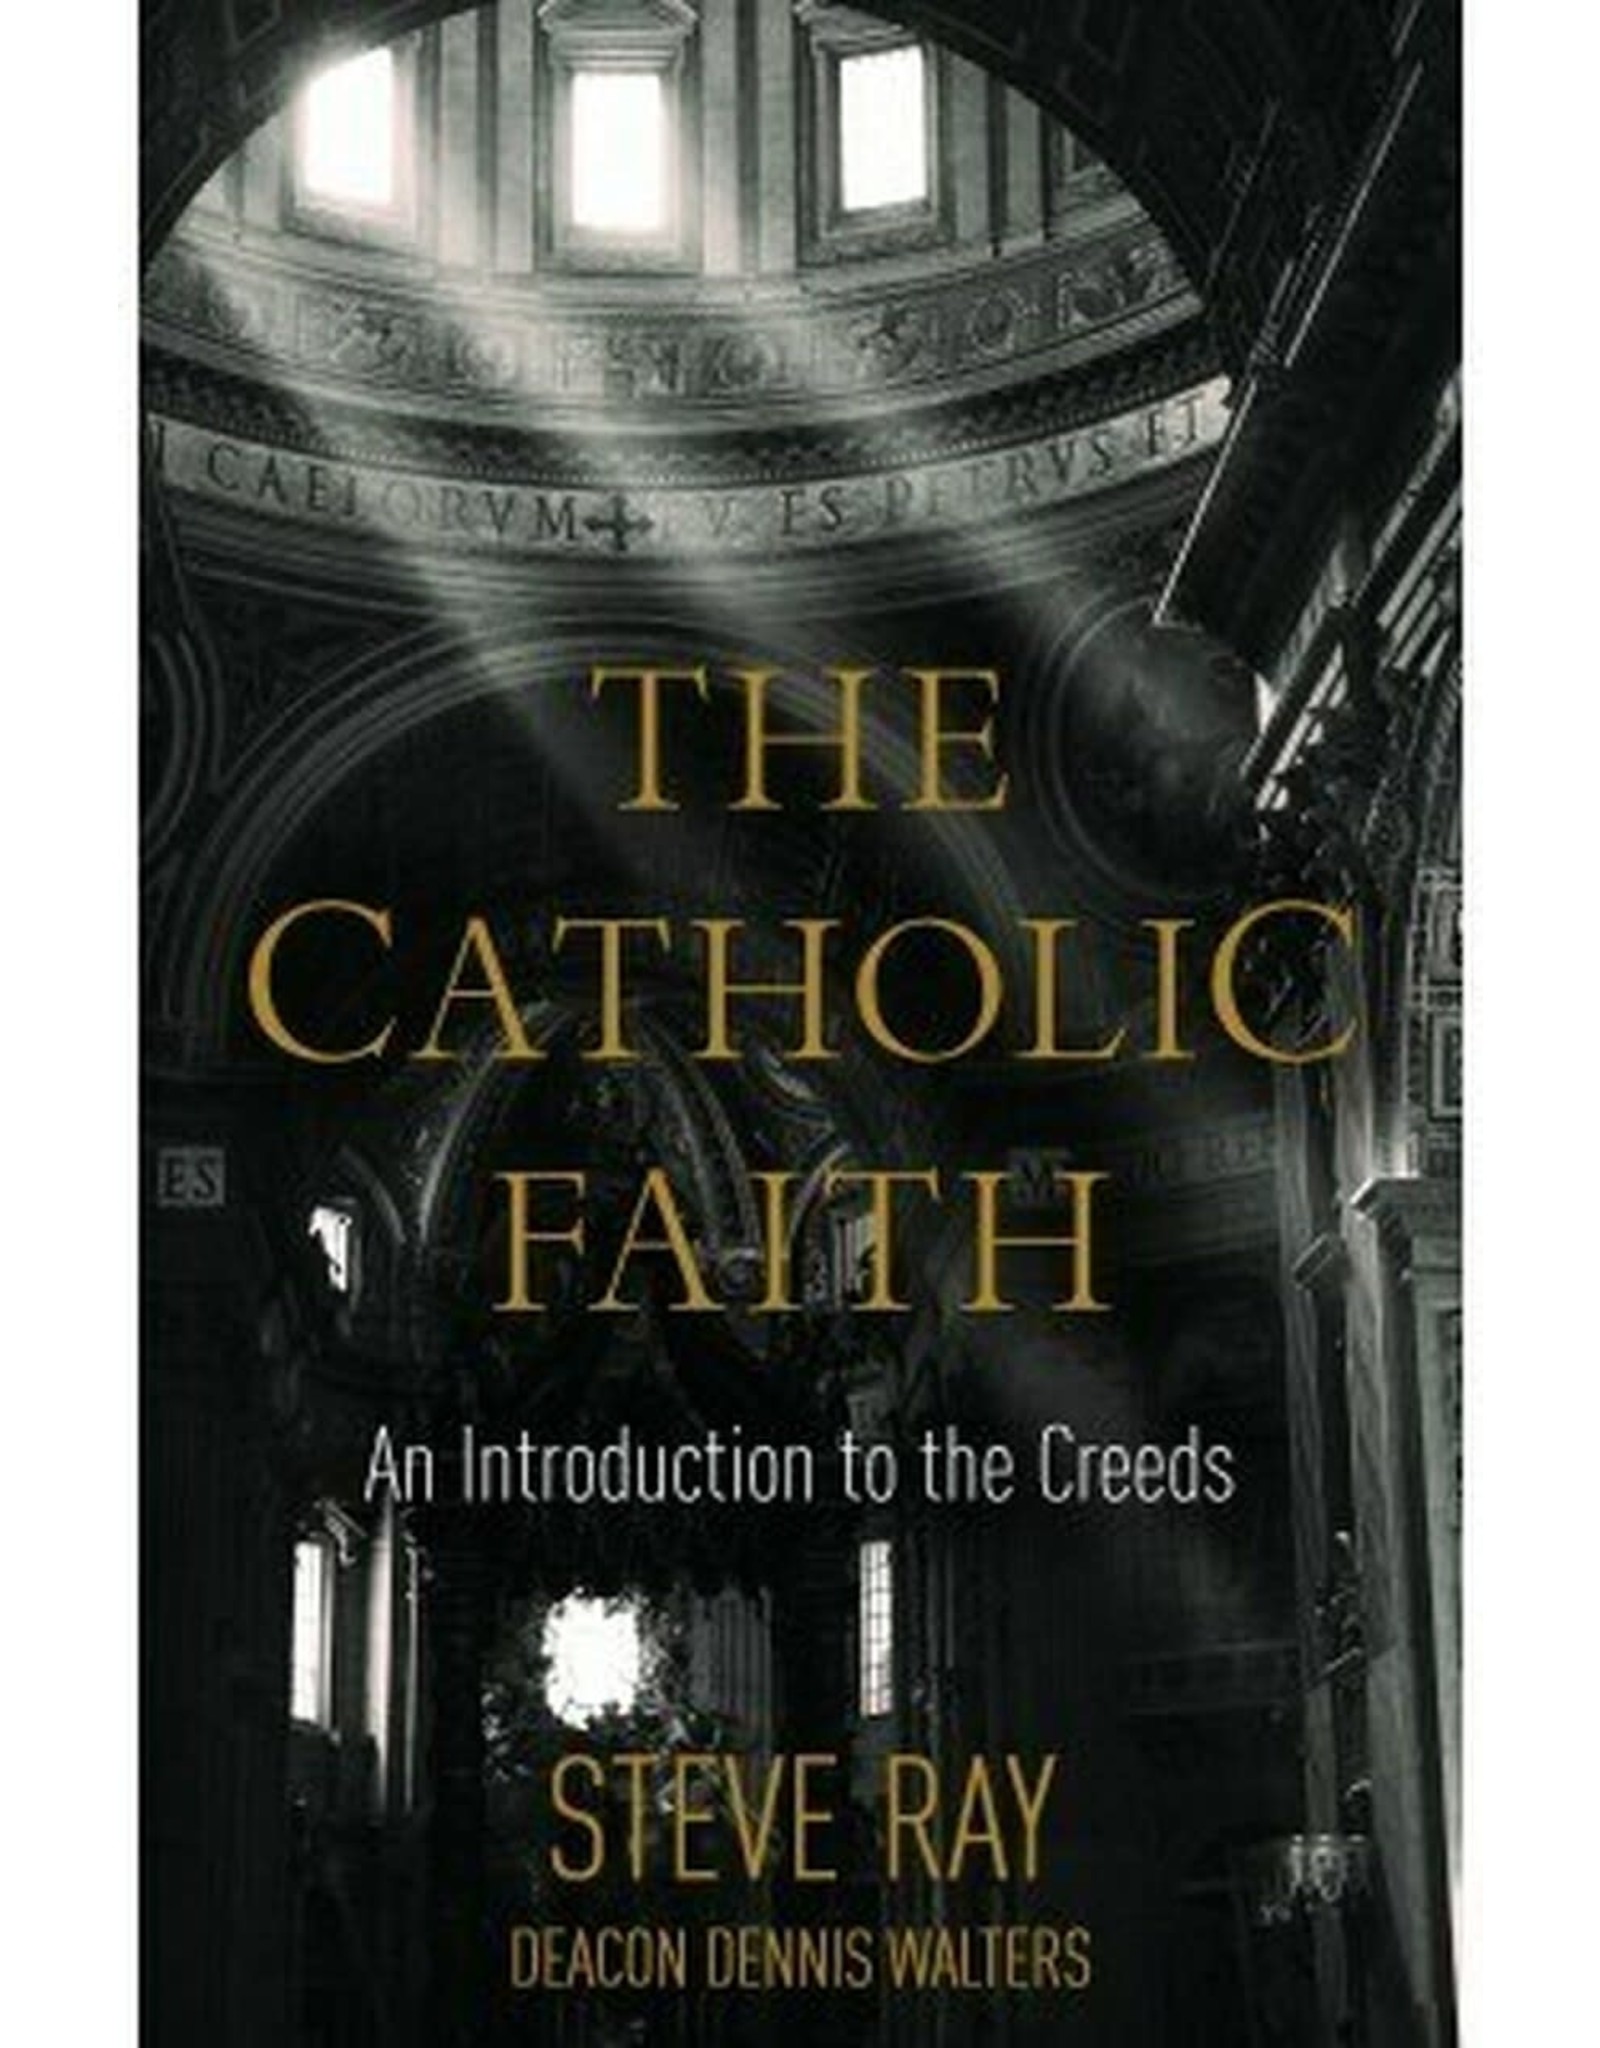 Tan Books (St. Benedict Press) The Catholic Faith: An Introduction to the Creeds